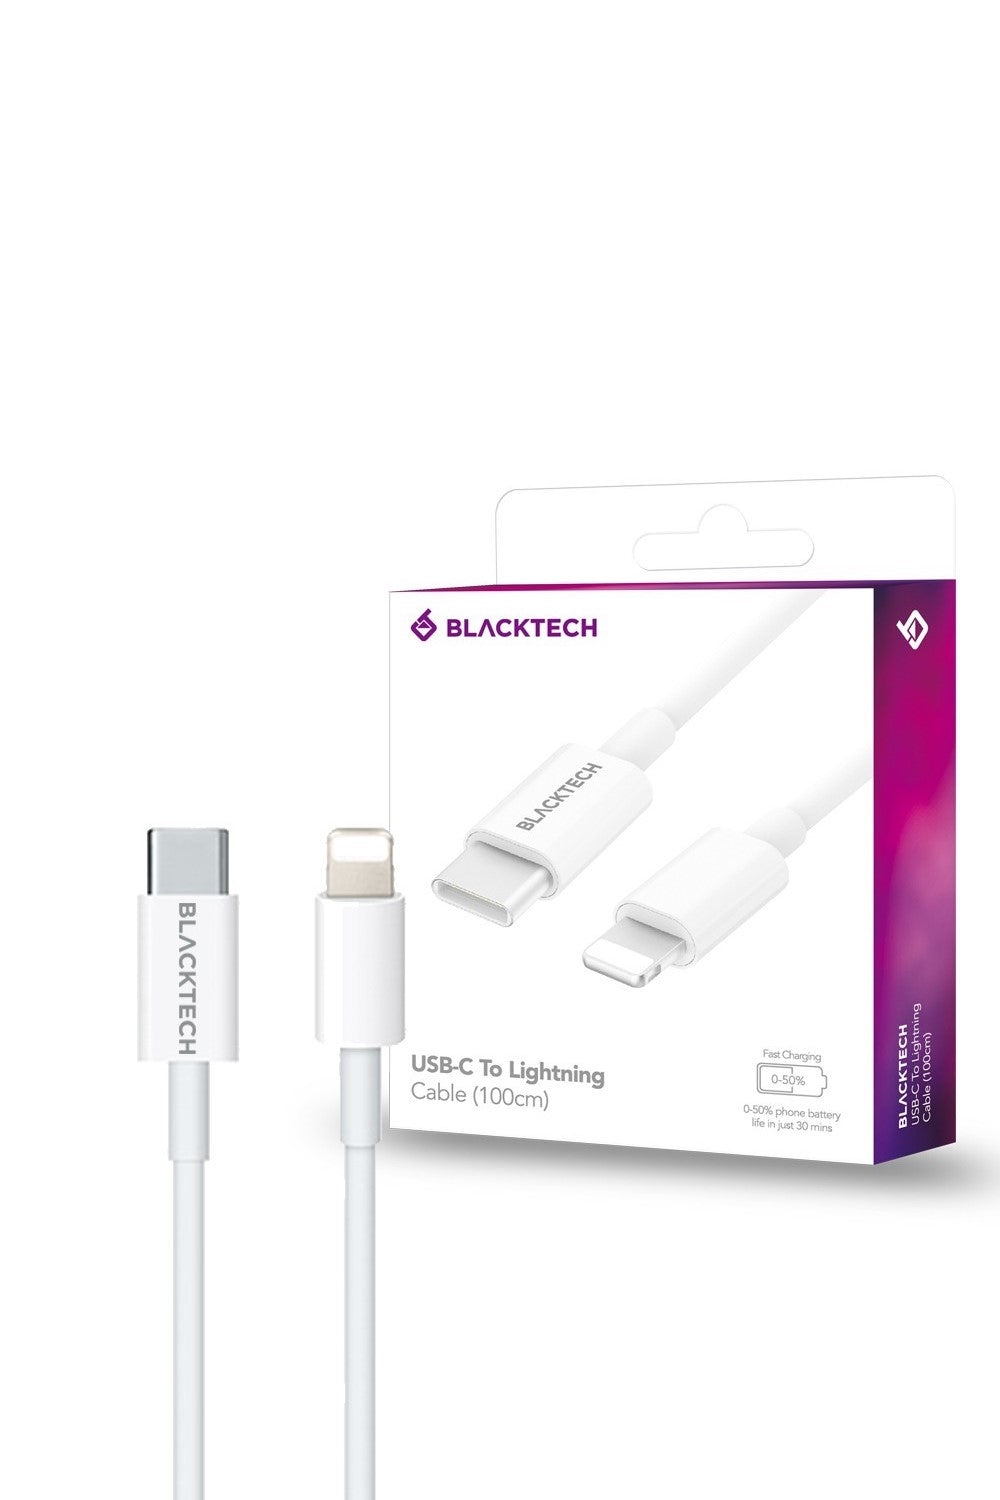 Blacktech USB-C to Lightning PD Fast Charging Cable for iPhone iPad